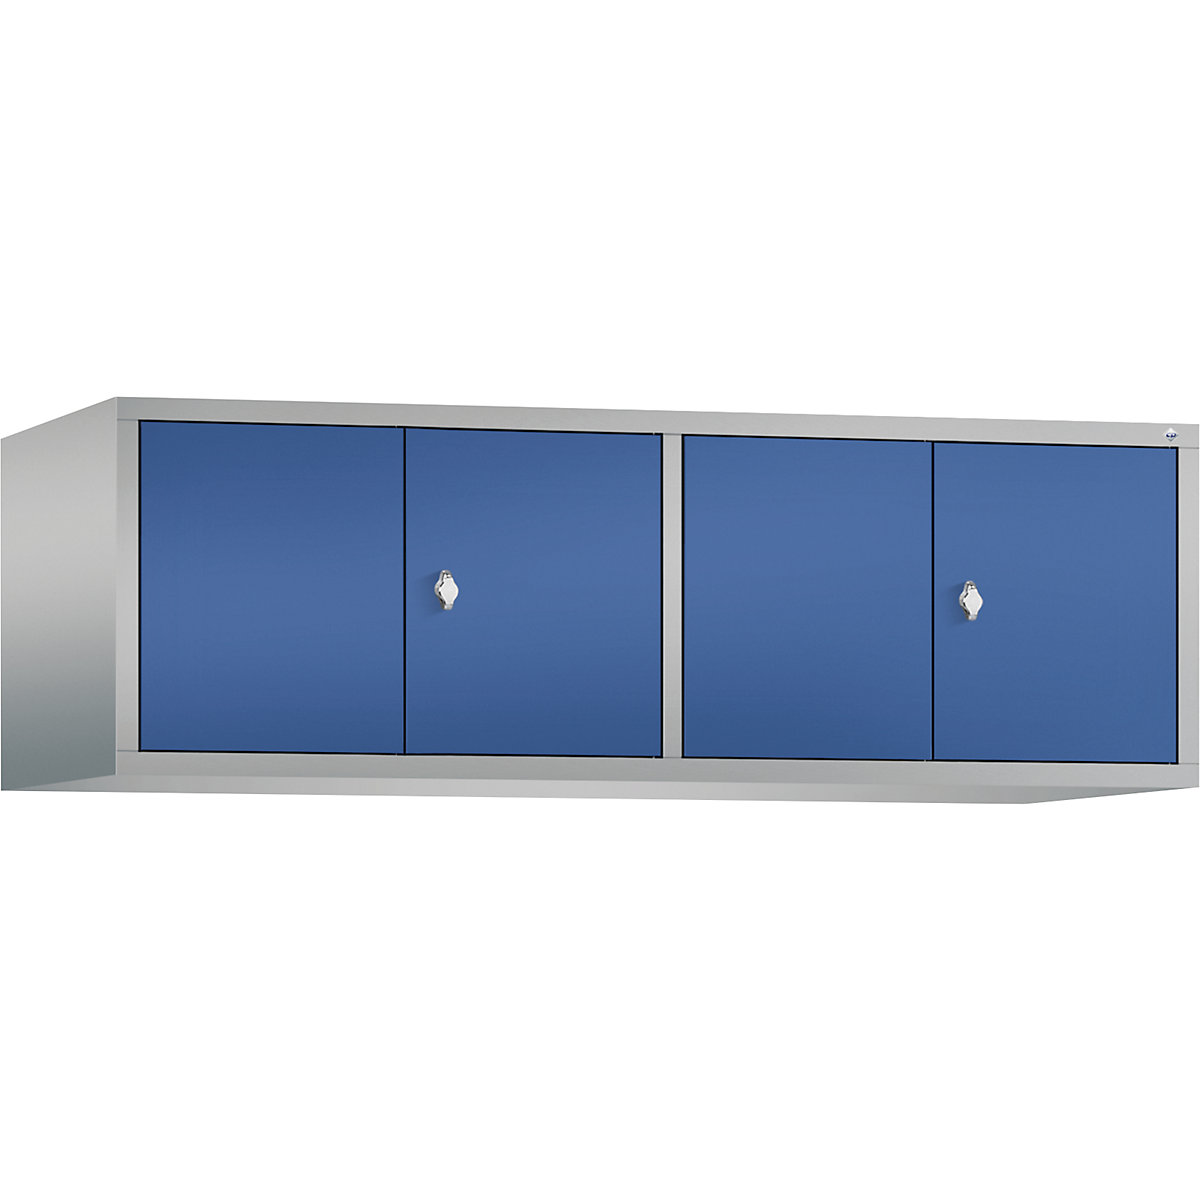 CLASSIC add-on cupboard, doors close in the middle – C+P, 4 compartments, compartment width 400 mm, white aluminium / gentian blue-4